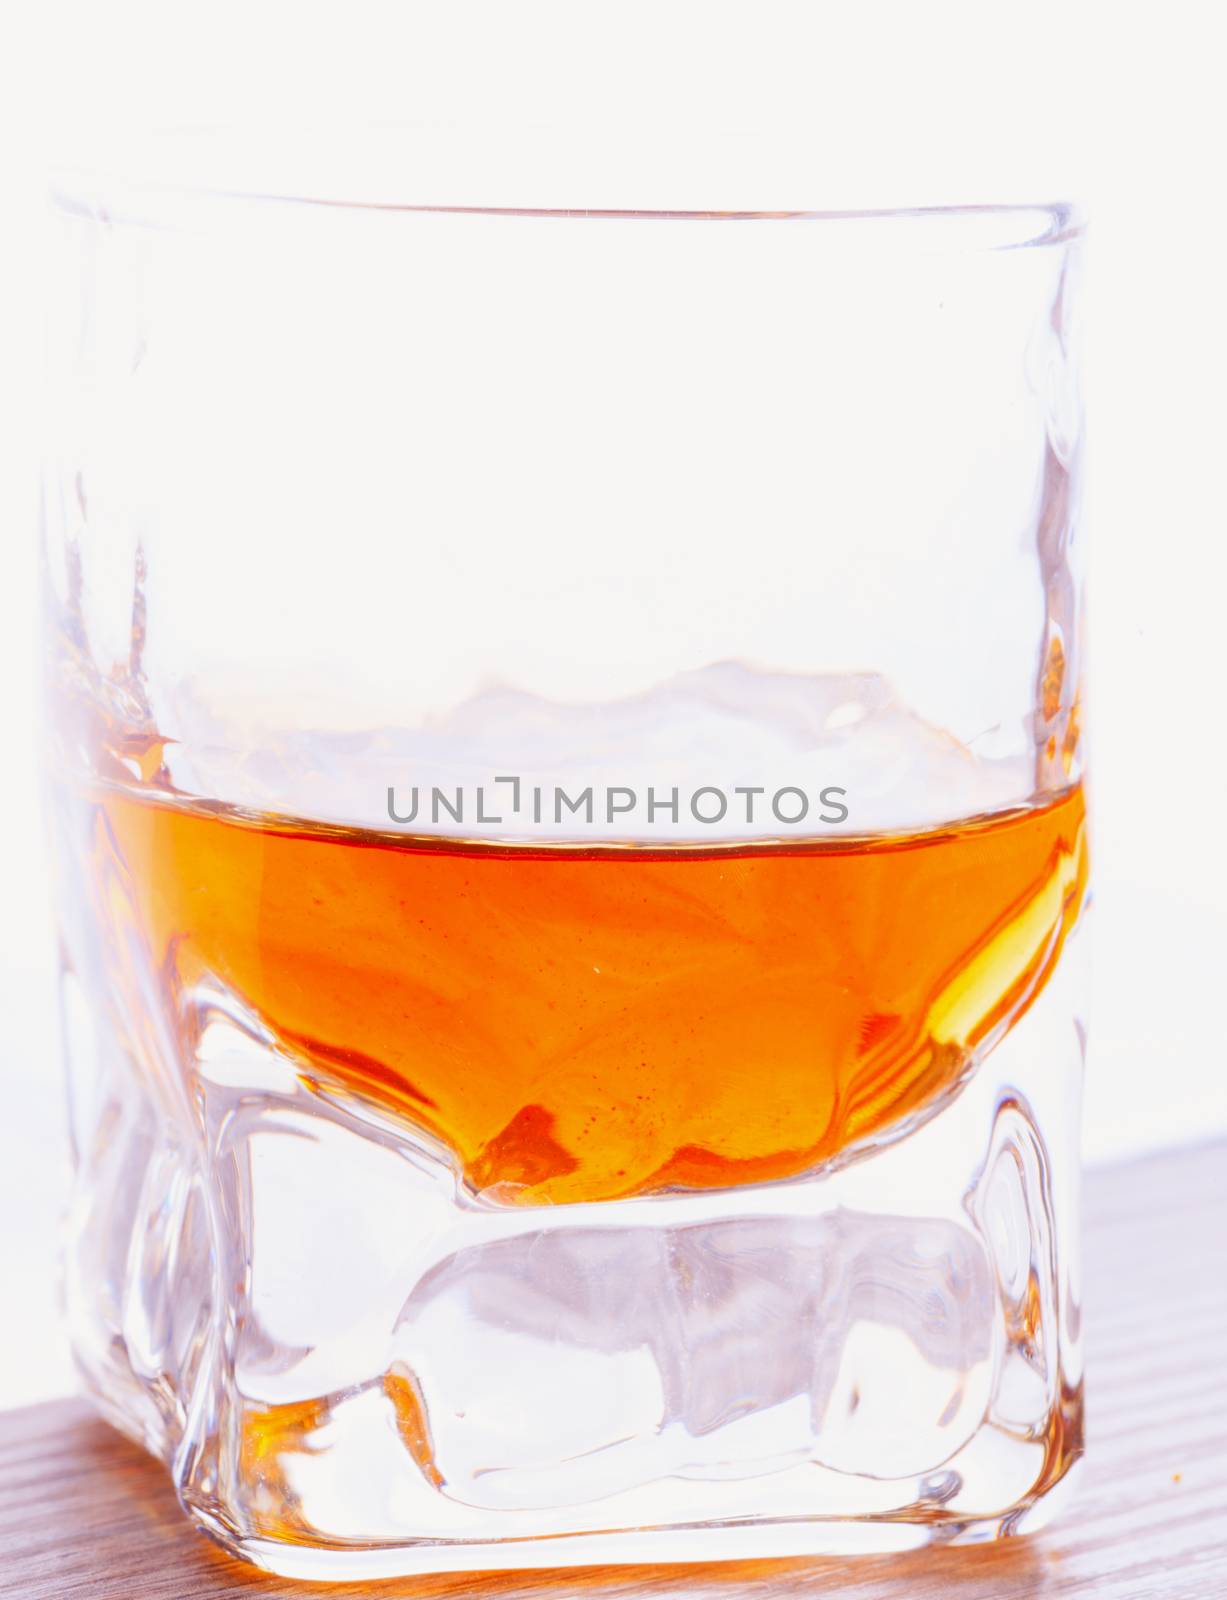 Whisky shot by Koufax73